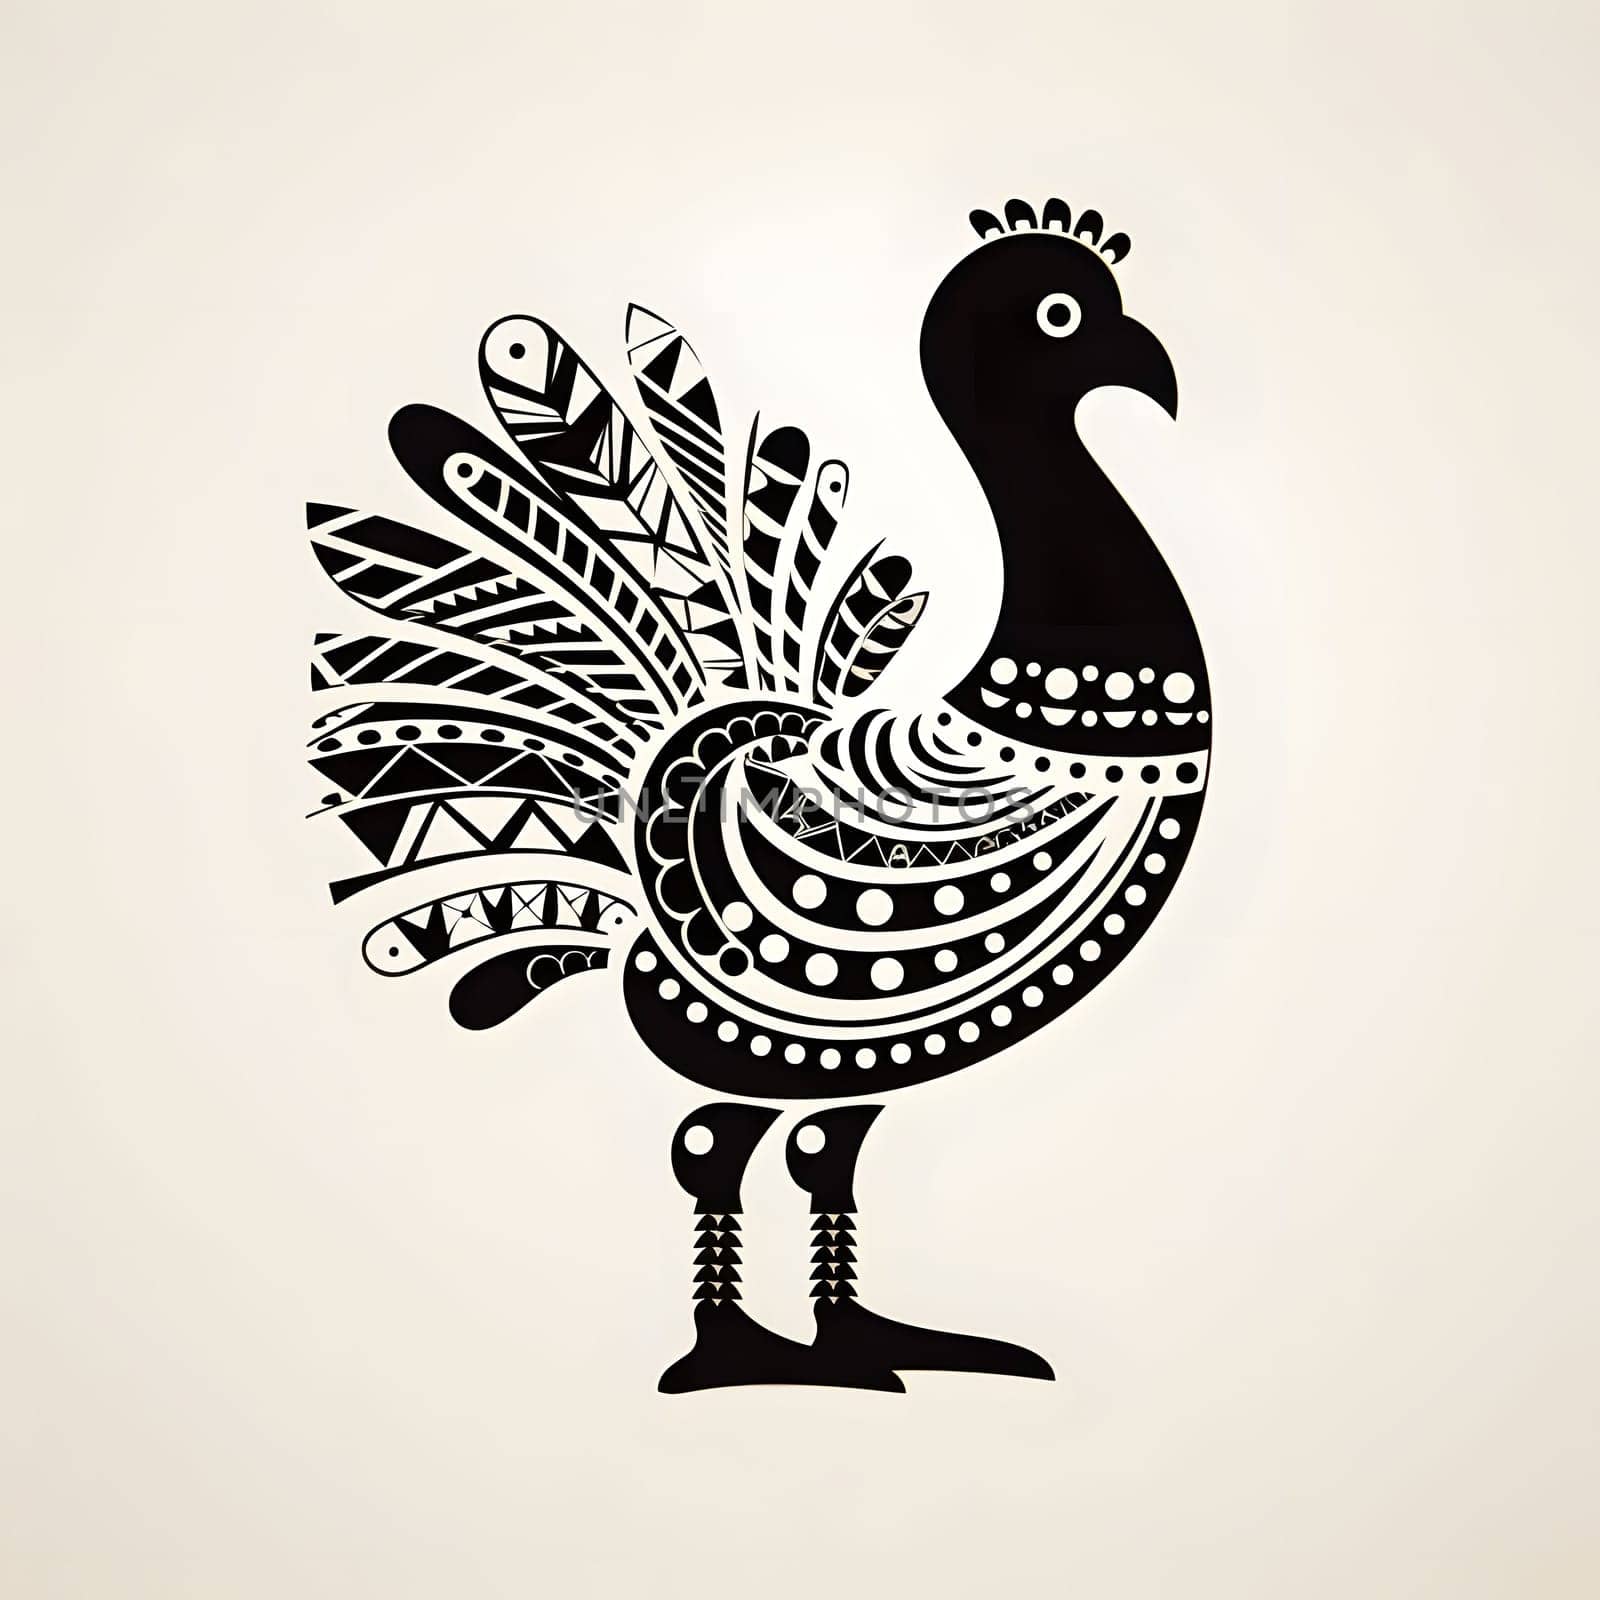 Logo composition, patterned silhouette of a turkey on a solid background. Turkey as the main dish of thanksgiving for the harvest. by ThemesS